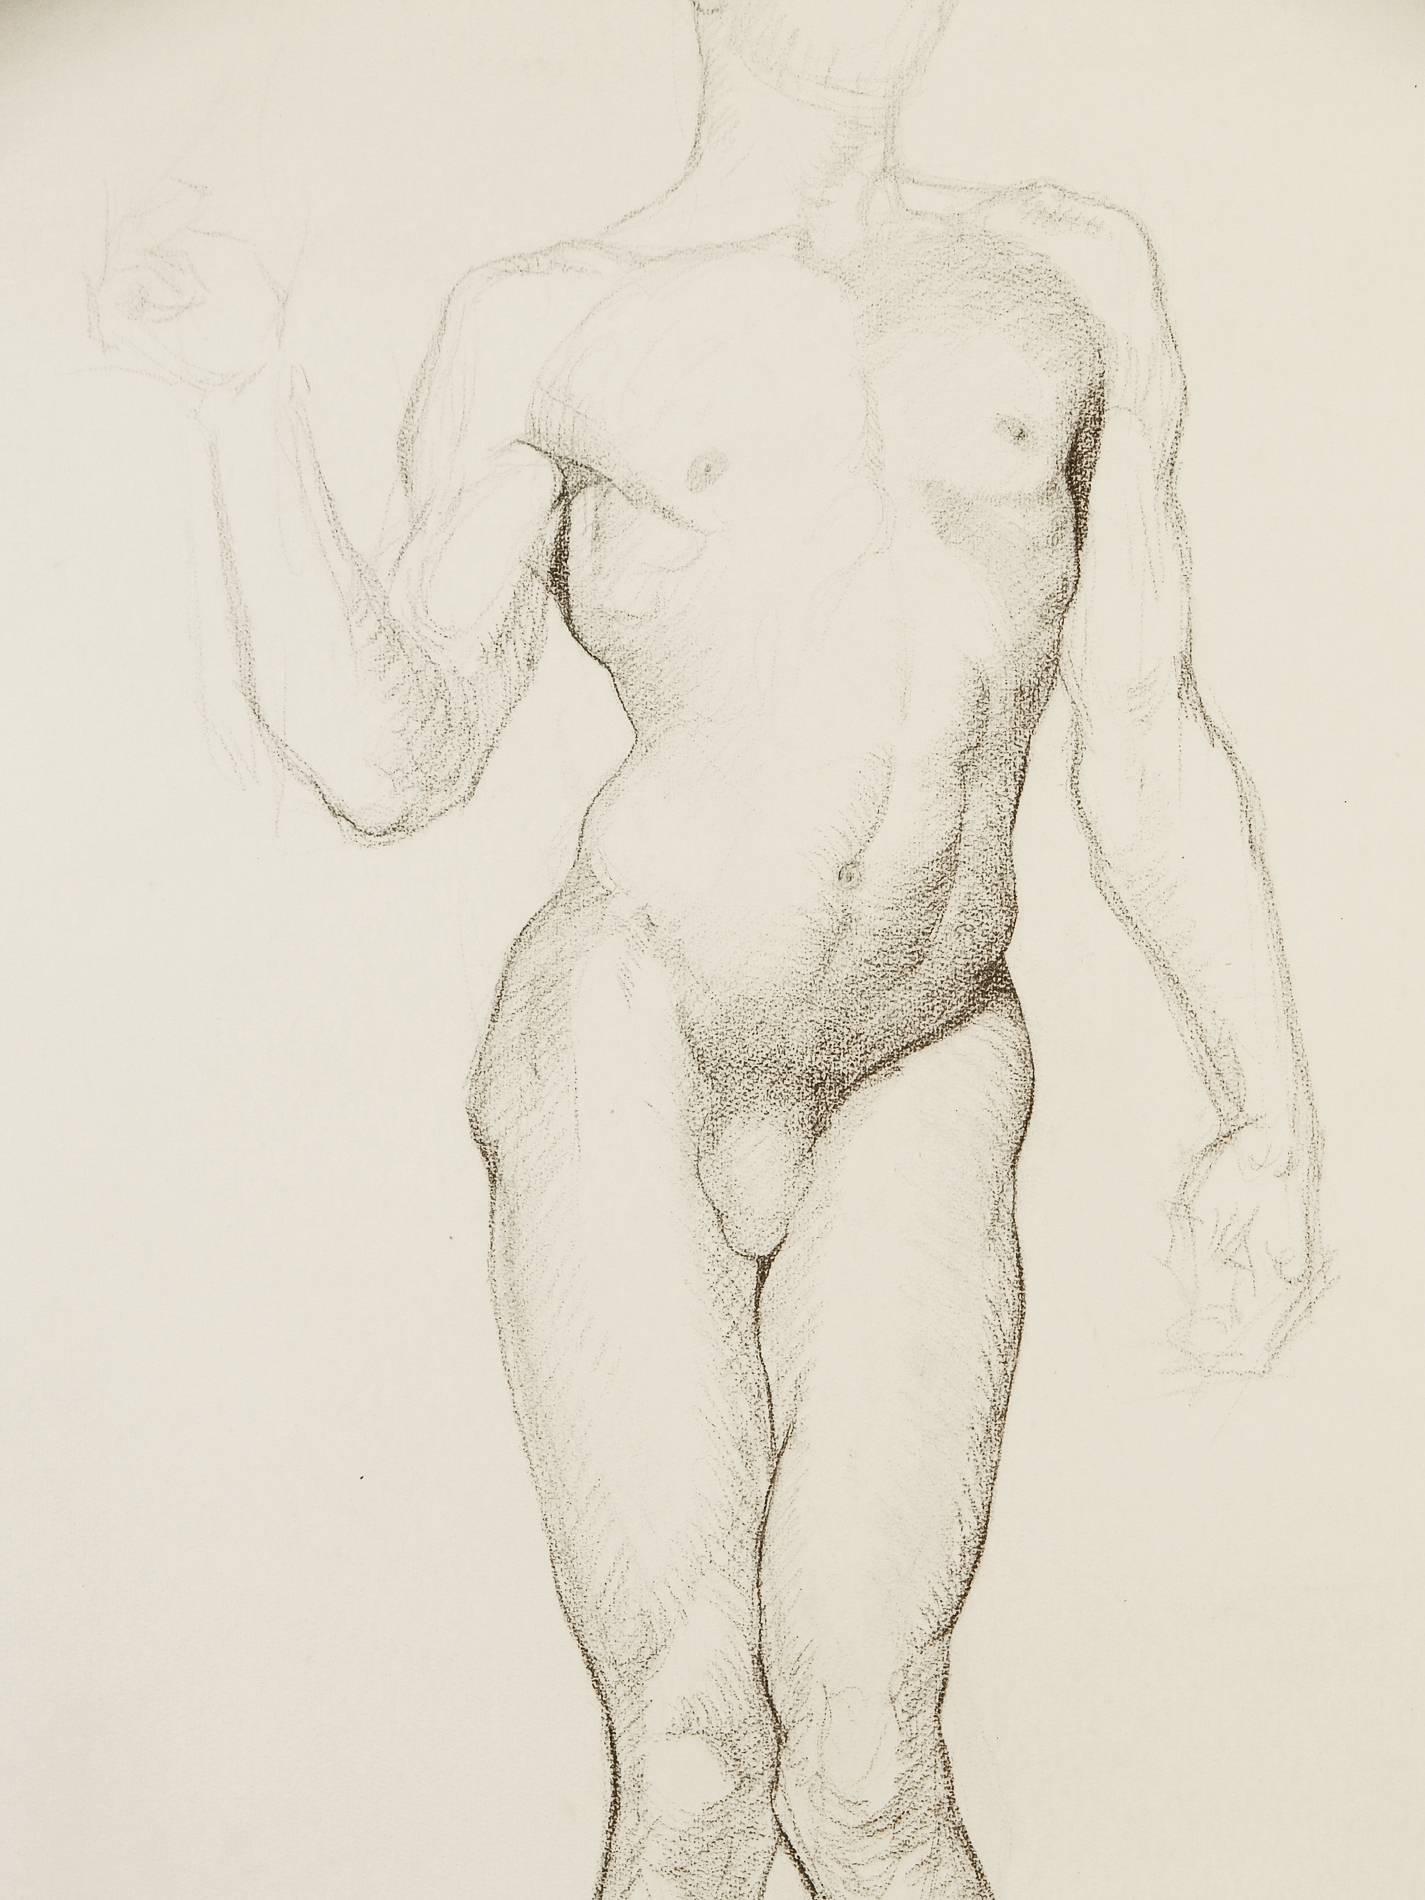 Beautifully demonstrating Dunbar beck's fine craftsmanship and mastery of the human figure, this drawing depicts a male nude with his pelvis cocked to the right, and his left leg pushing up against his right, a dynamic pose that reflects the